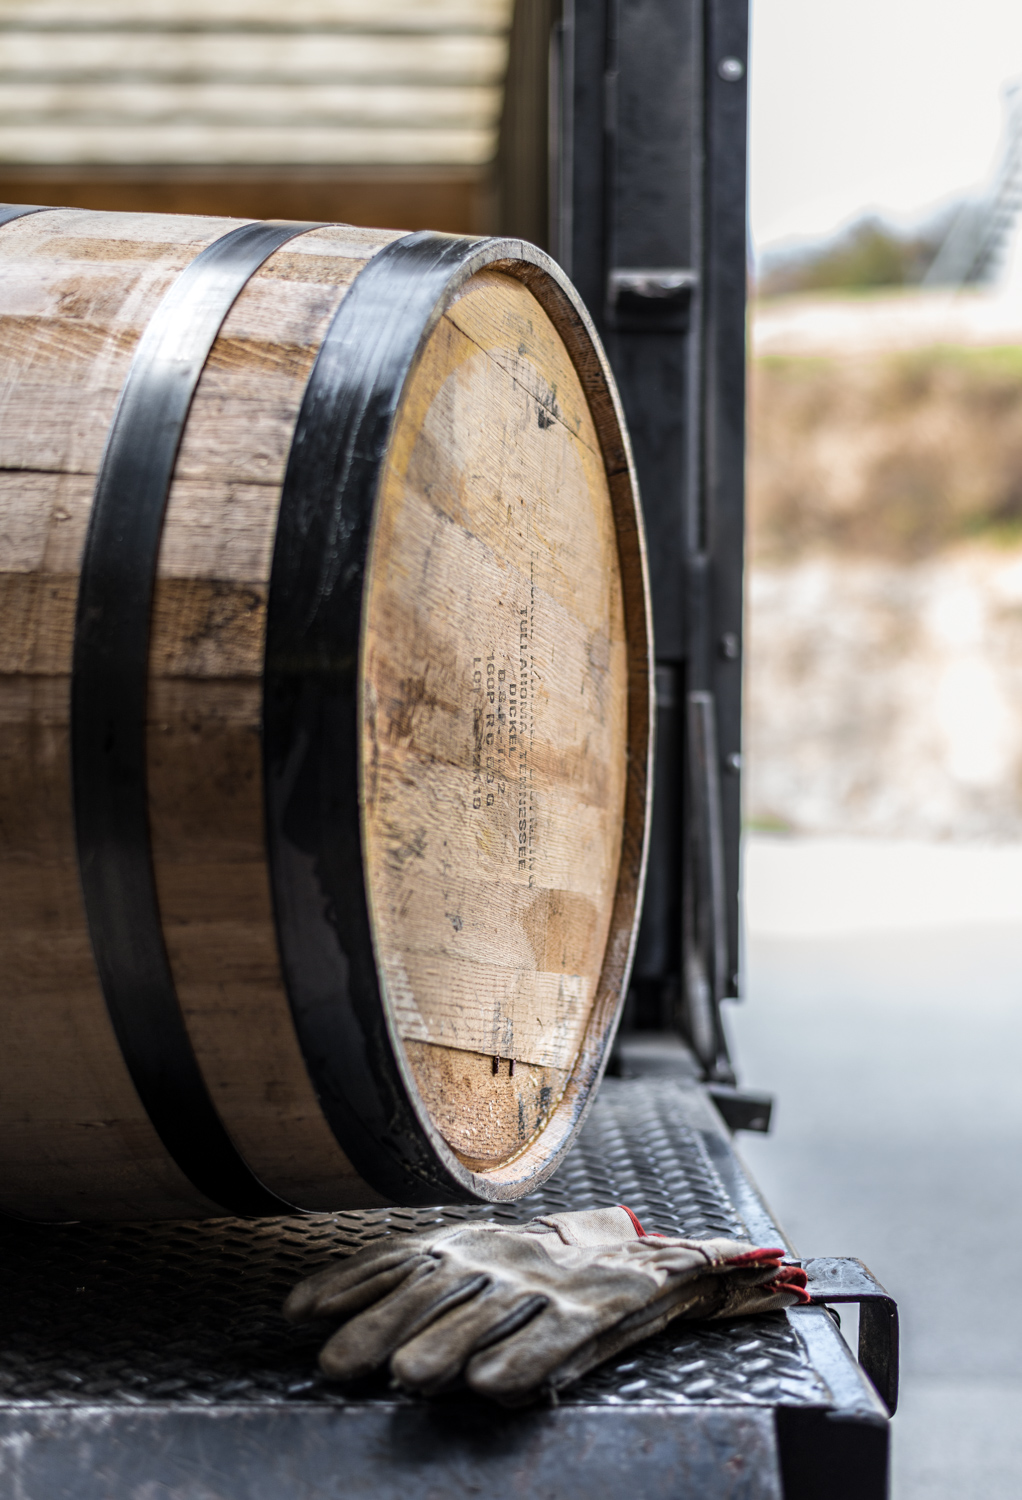 Barrel of whisky with work gloves on a truck at George Dickel Distillery. Rights-managed stock photo.